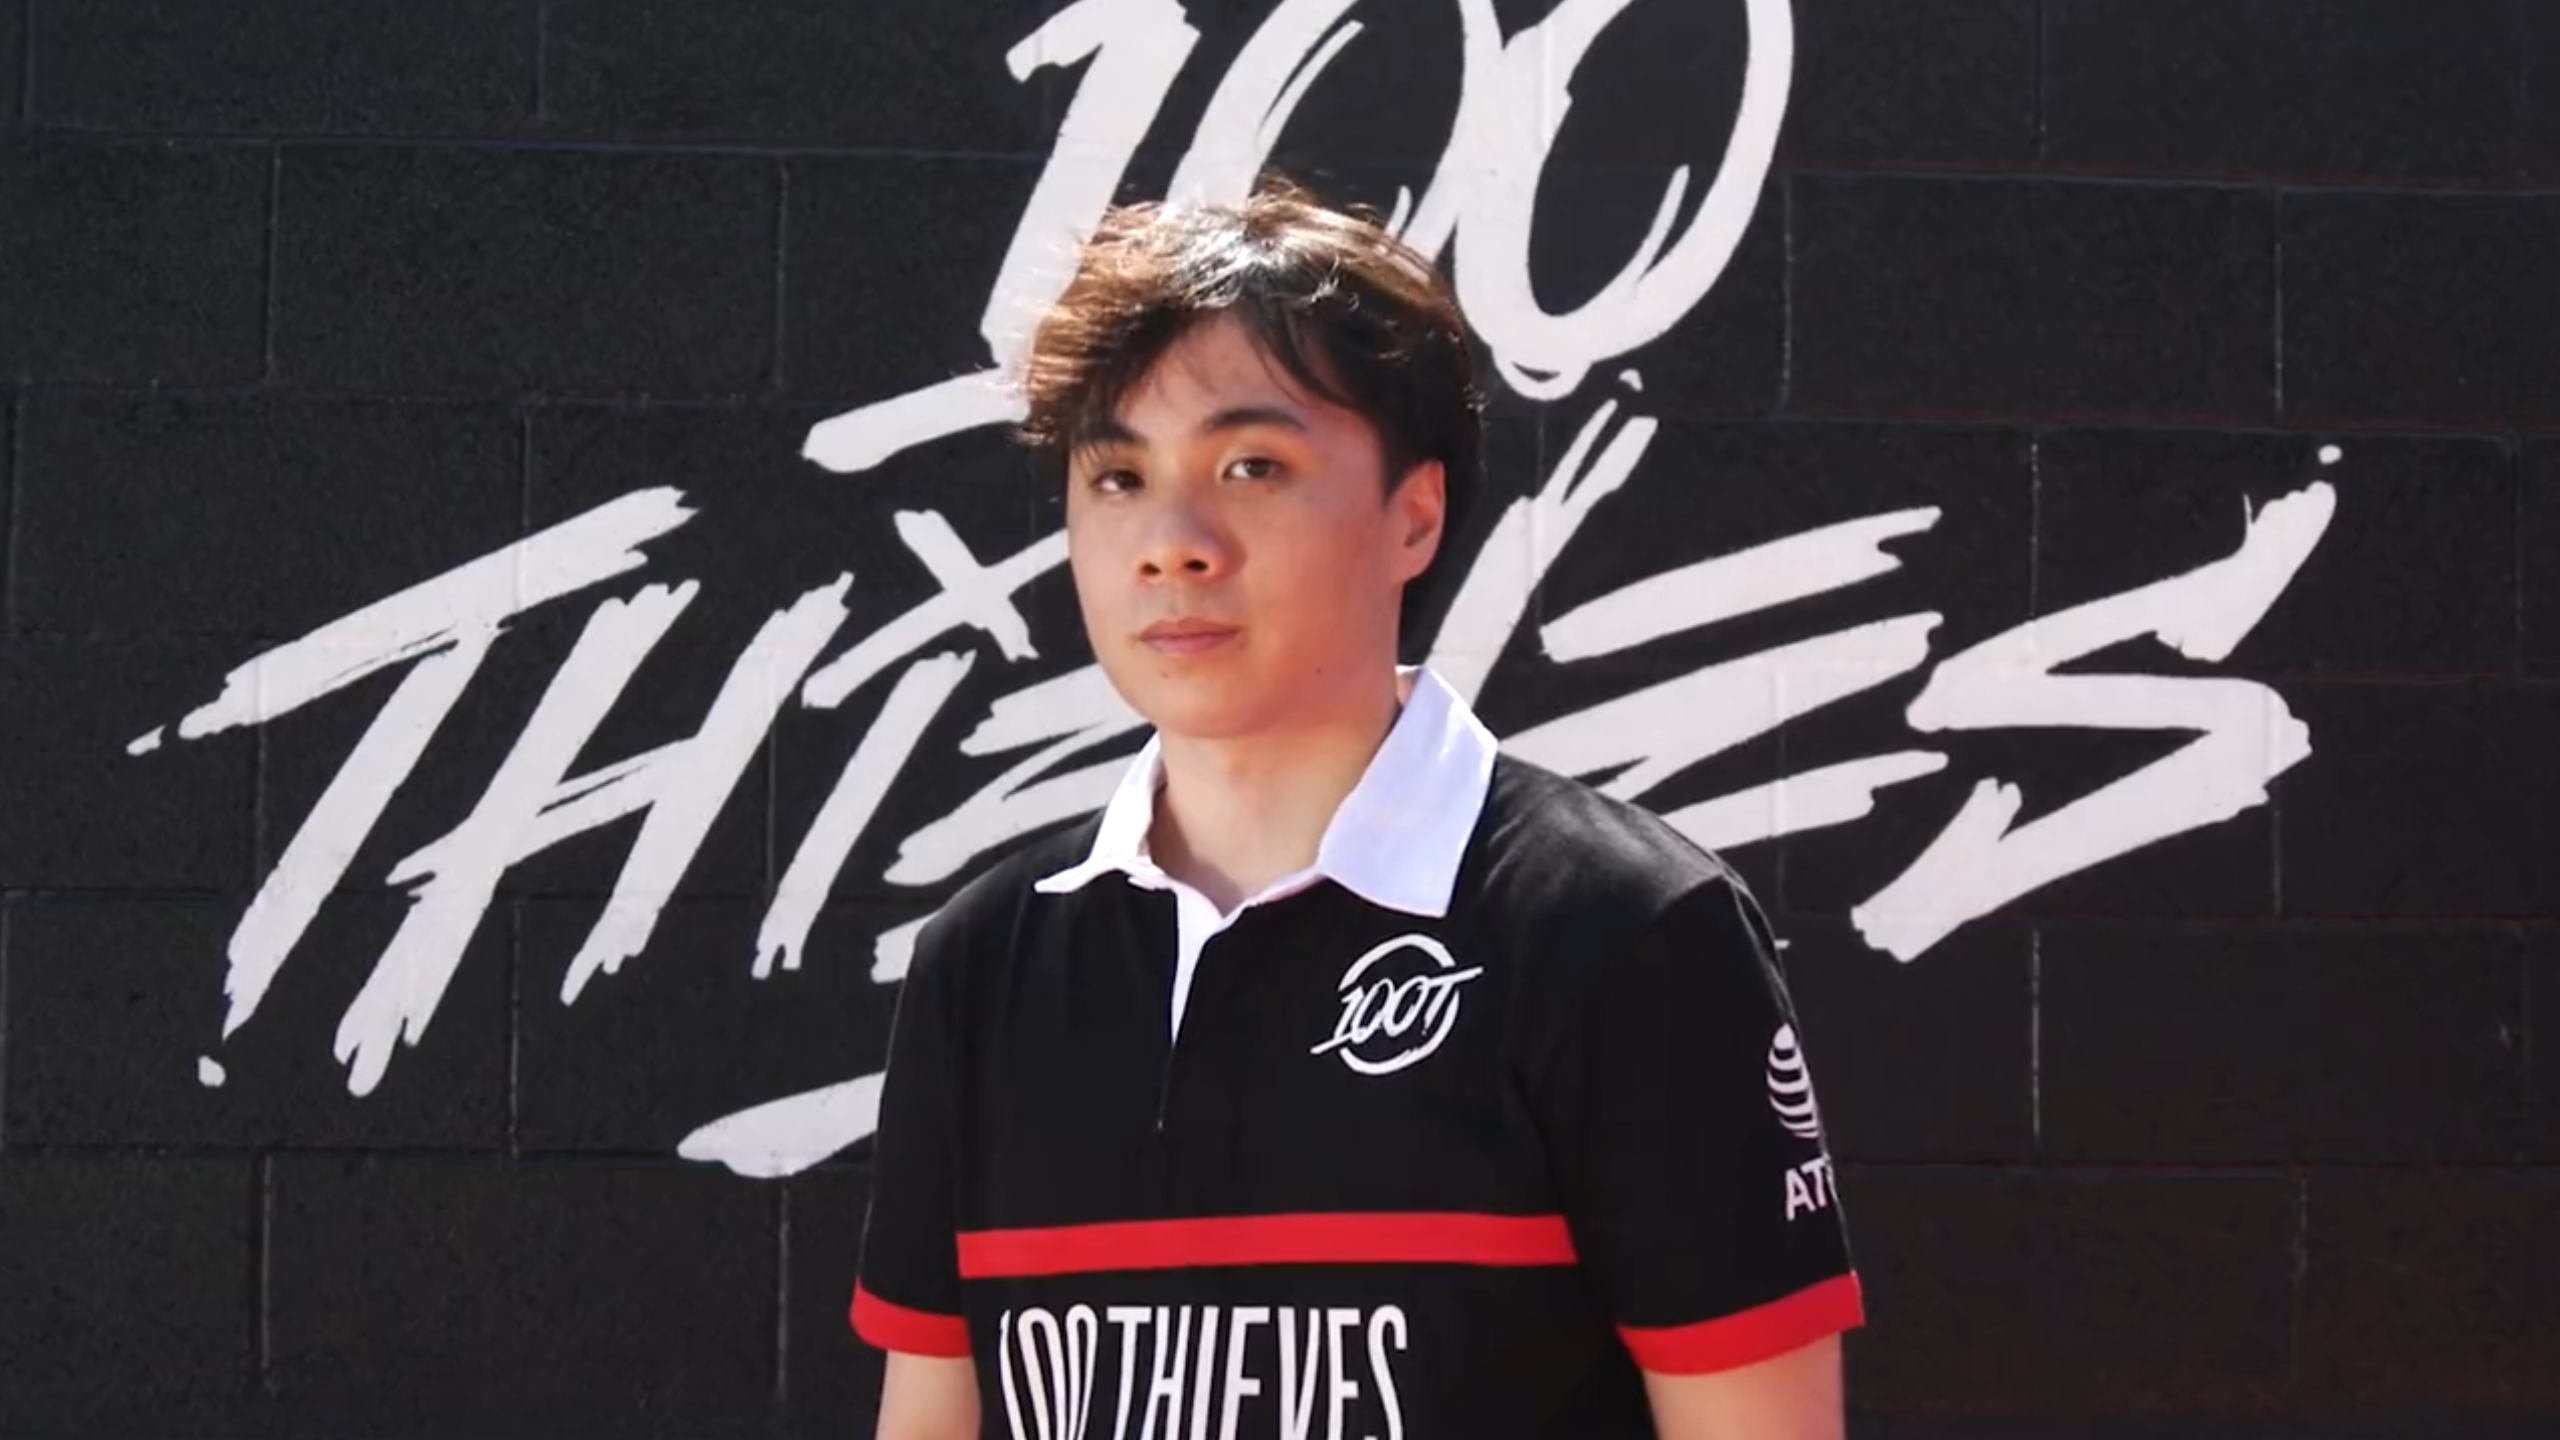 100T releases star duelist to make way for Cryocells - Dot Esports